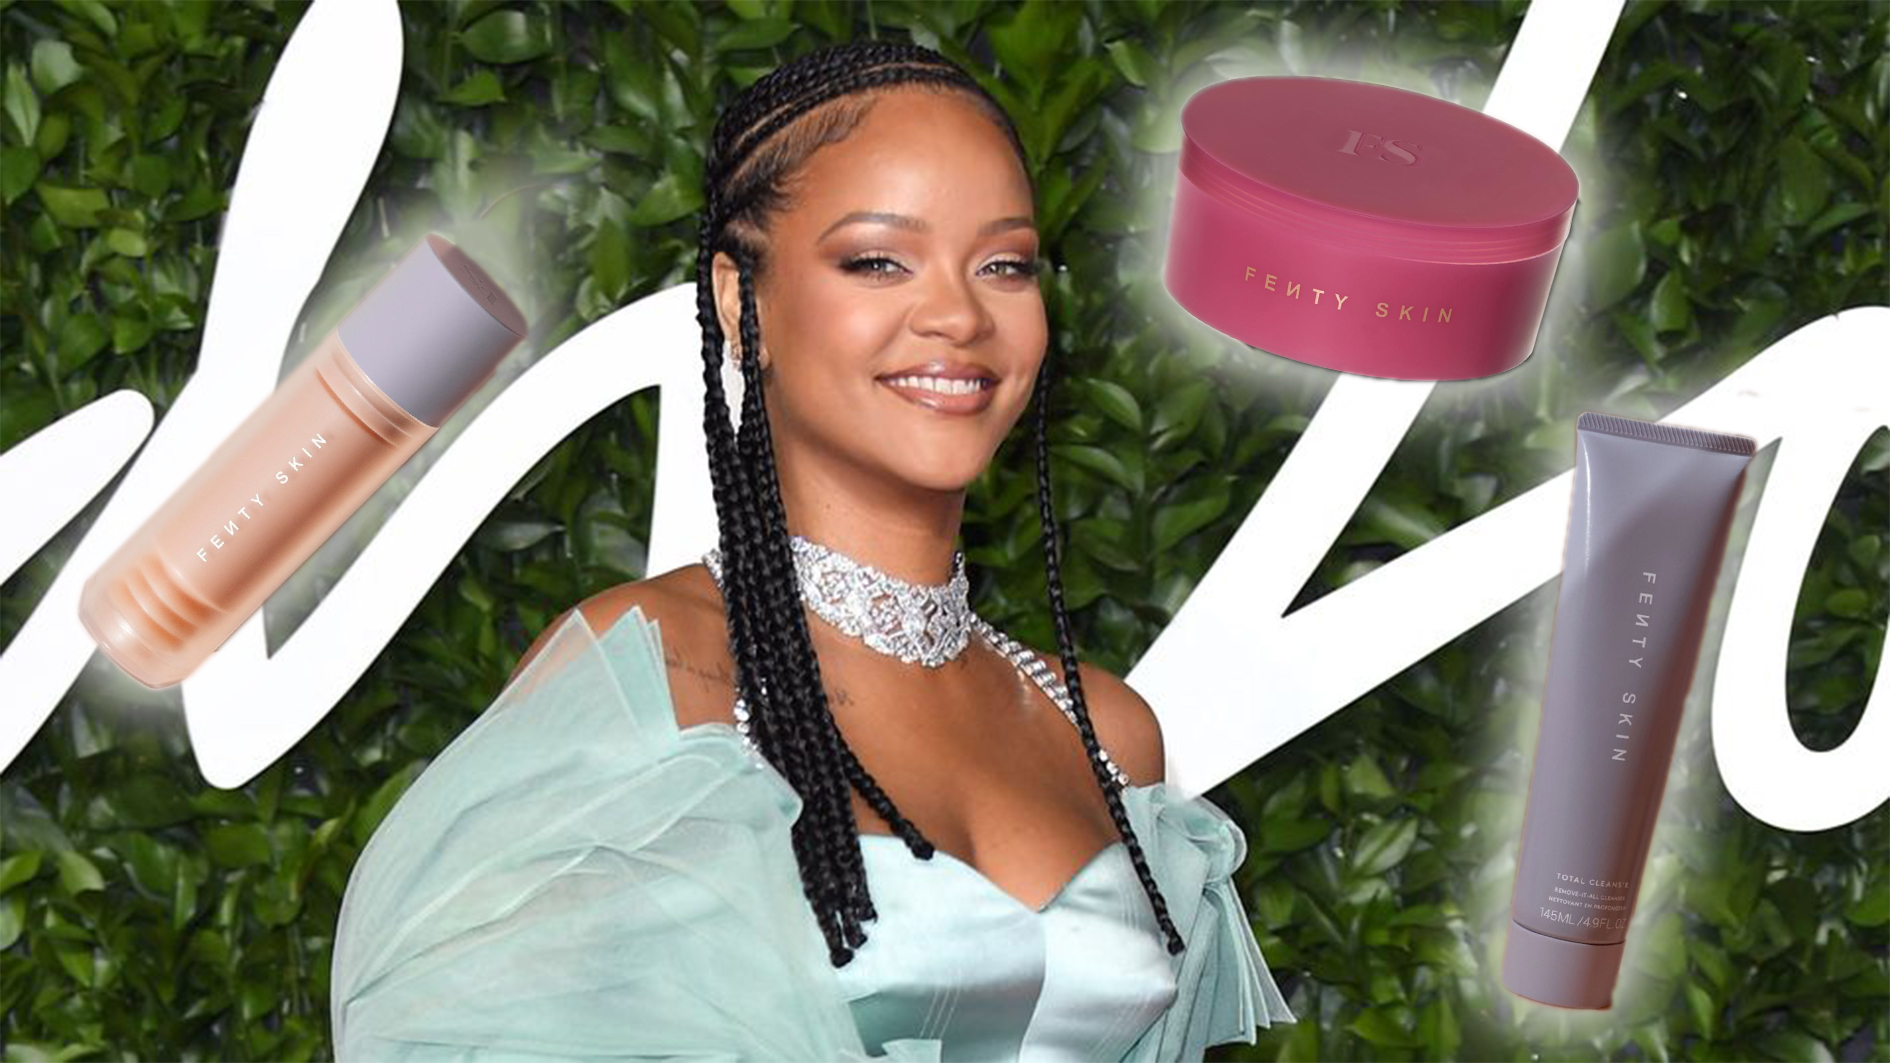 Fenty Skin: Everything you need to know about Rihanna's skin-care